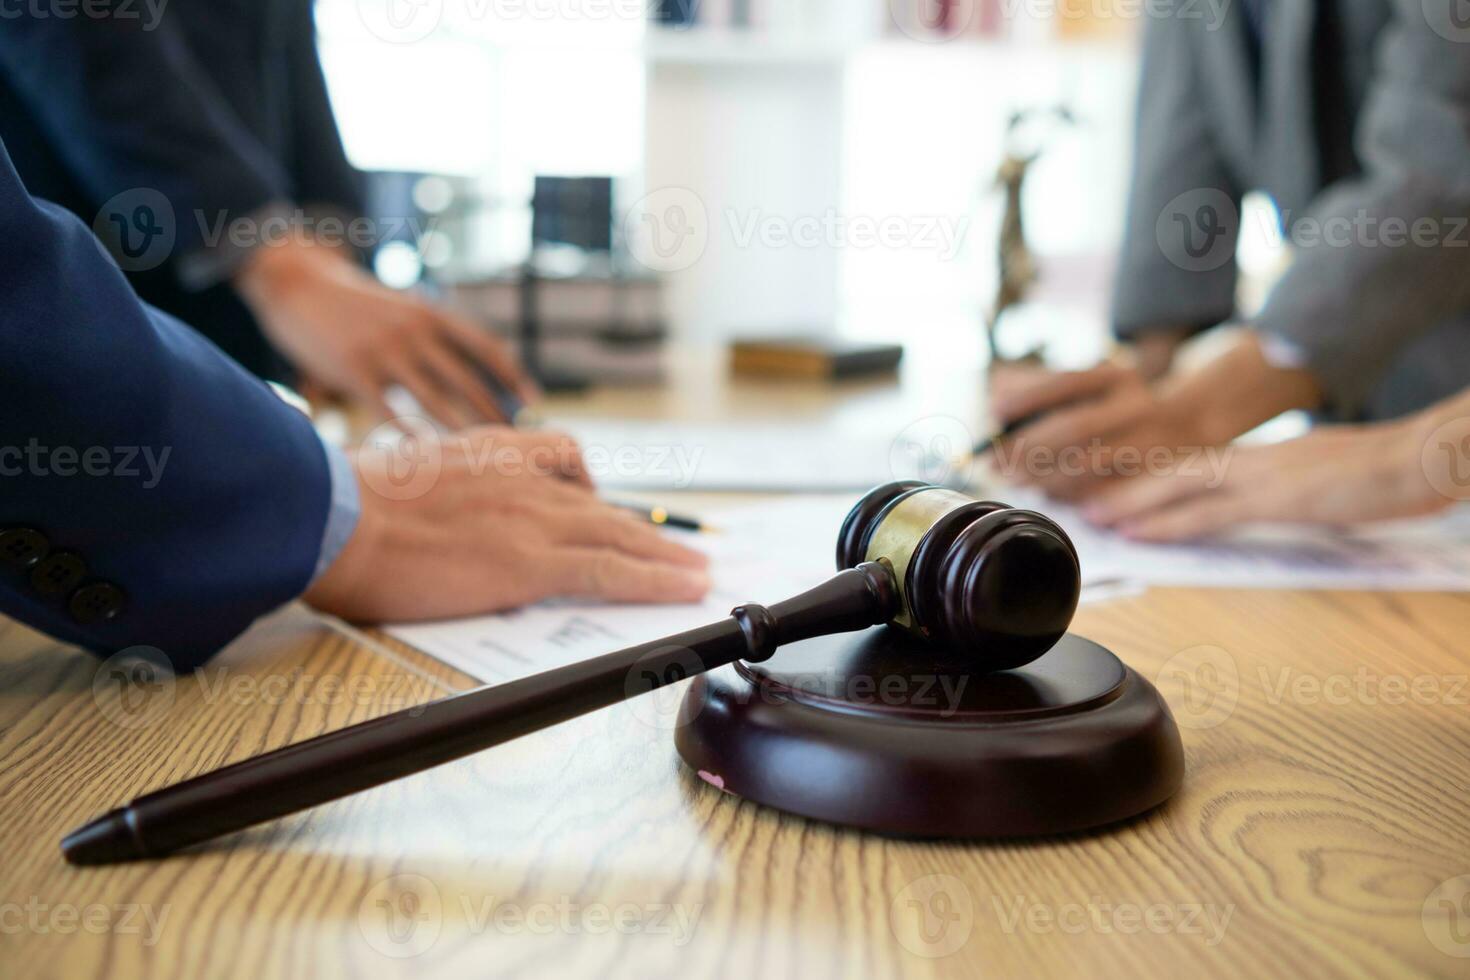 judge's gavel in law office is placed on table to symbolize judge deciding lawsuit. gavel wood on wooden table of lawyers in legal advice office as symbol of fair judgment in cases. photo